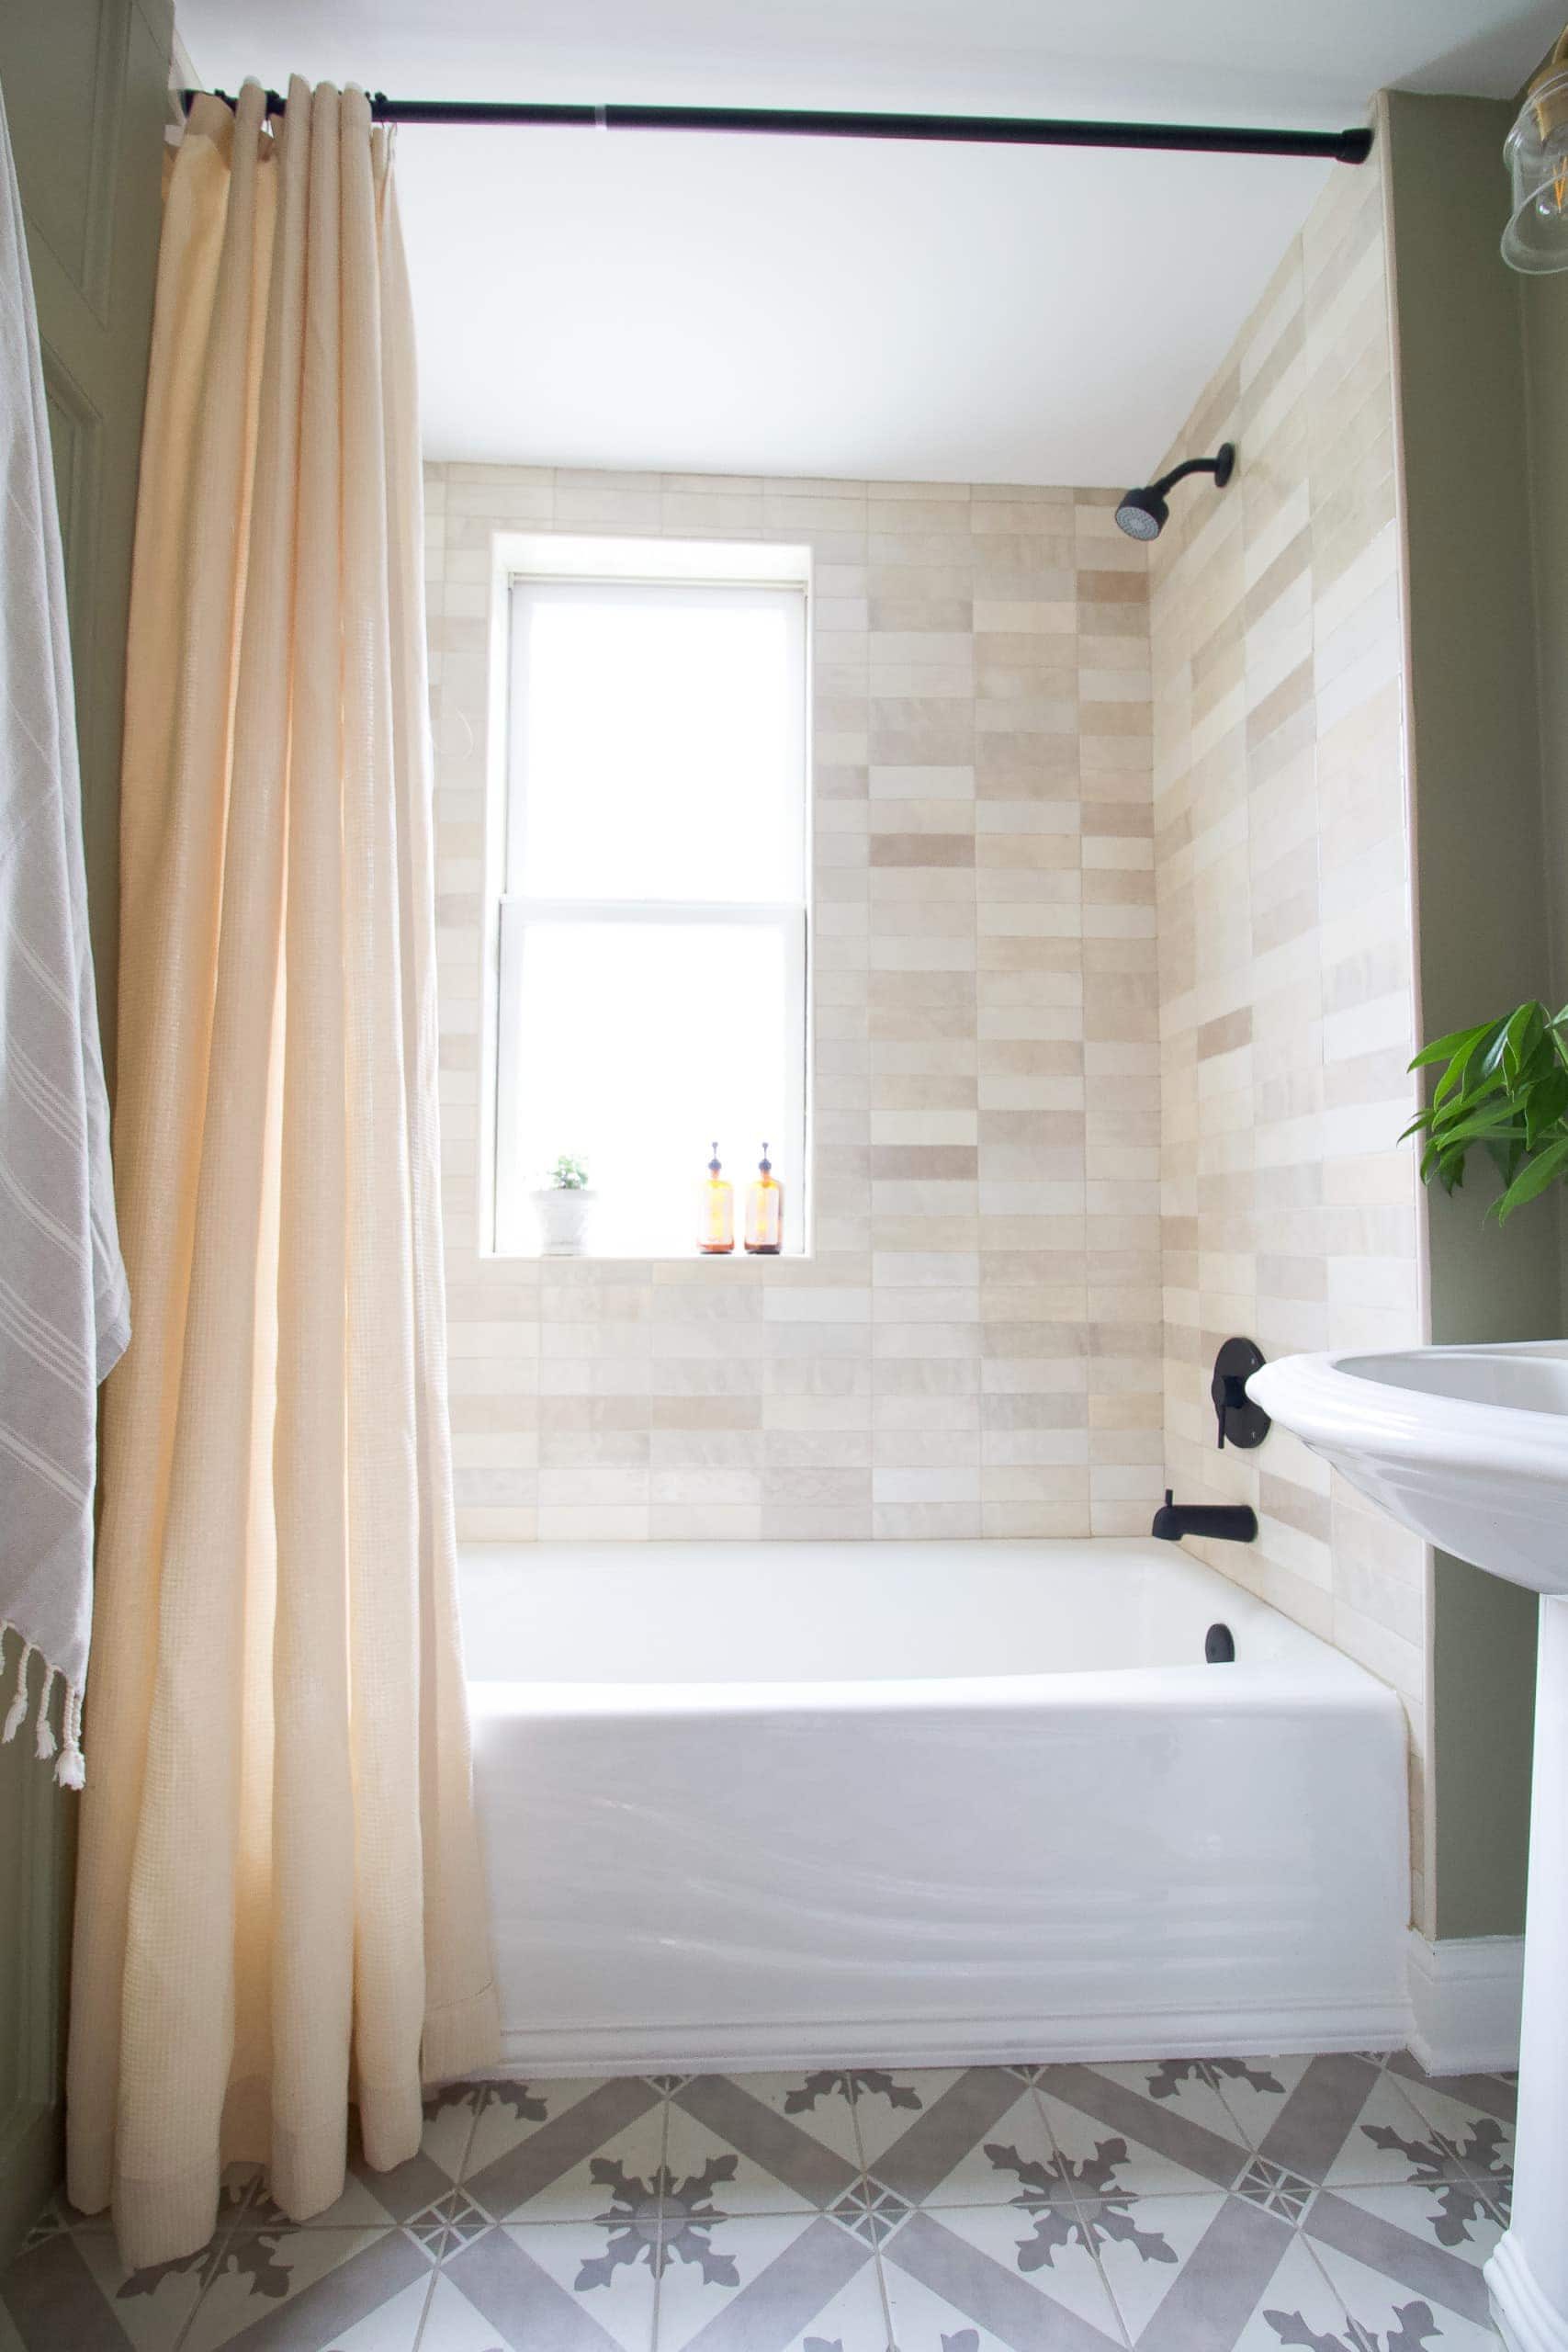 Using creme cloe tile in the shower